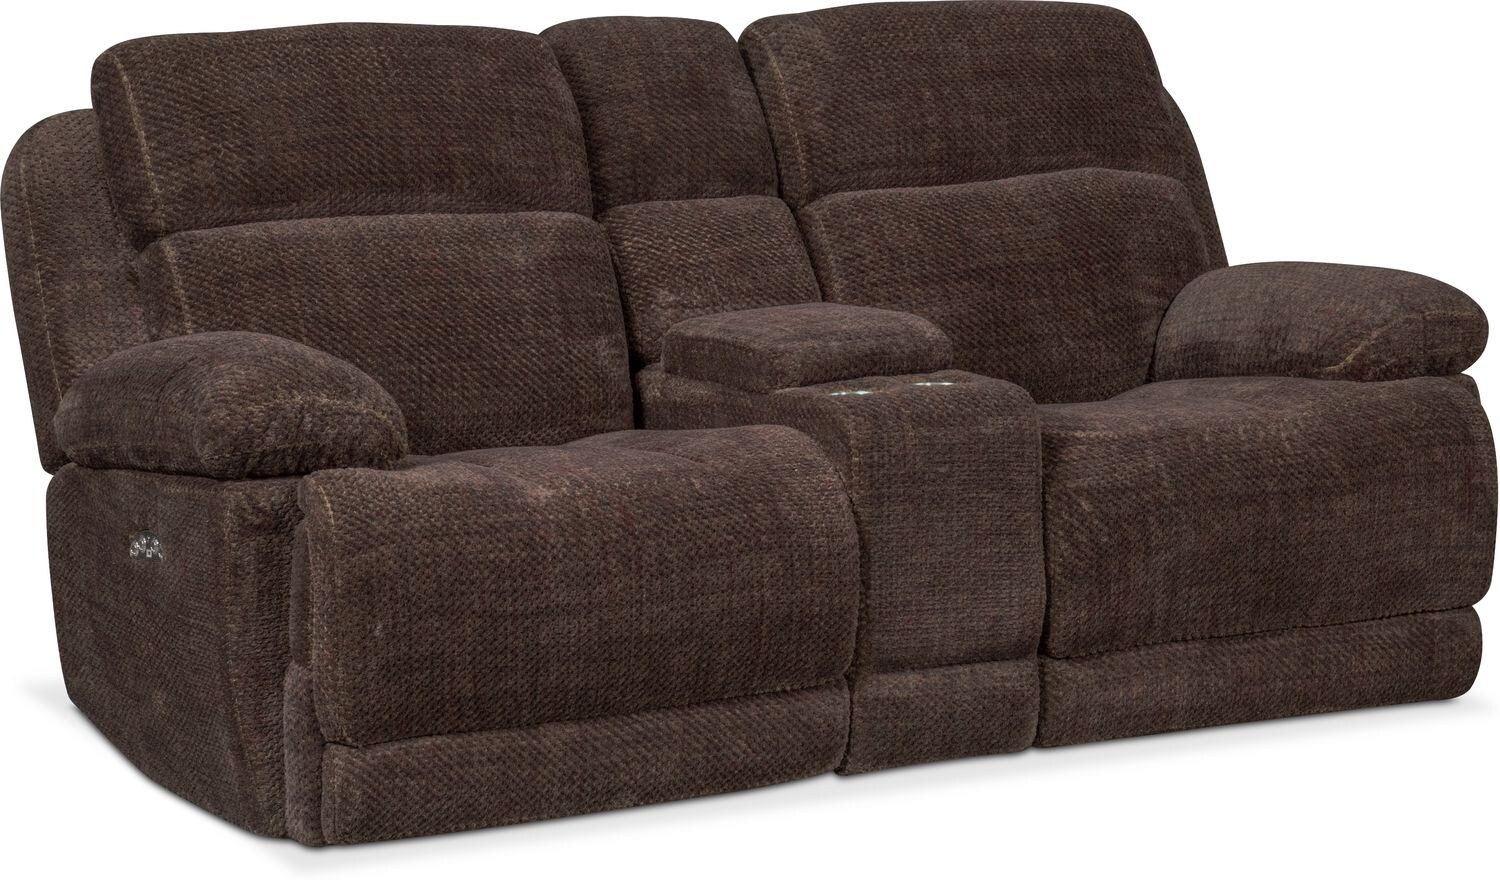 Monte Carlo Dual Power Reclining Loveseat - Brown | Value ...